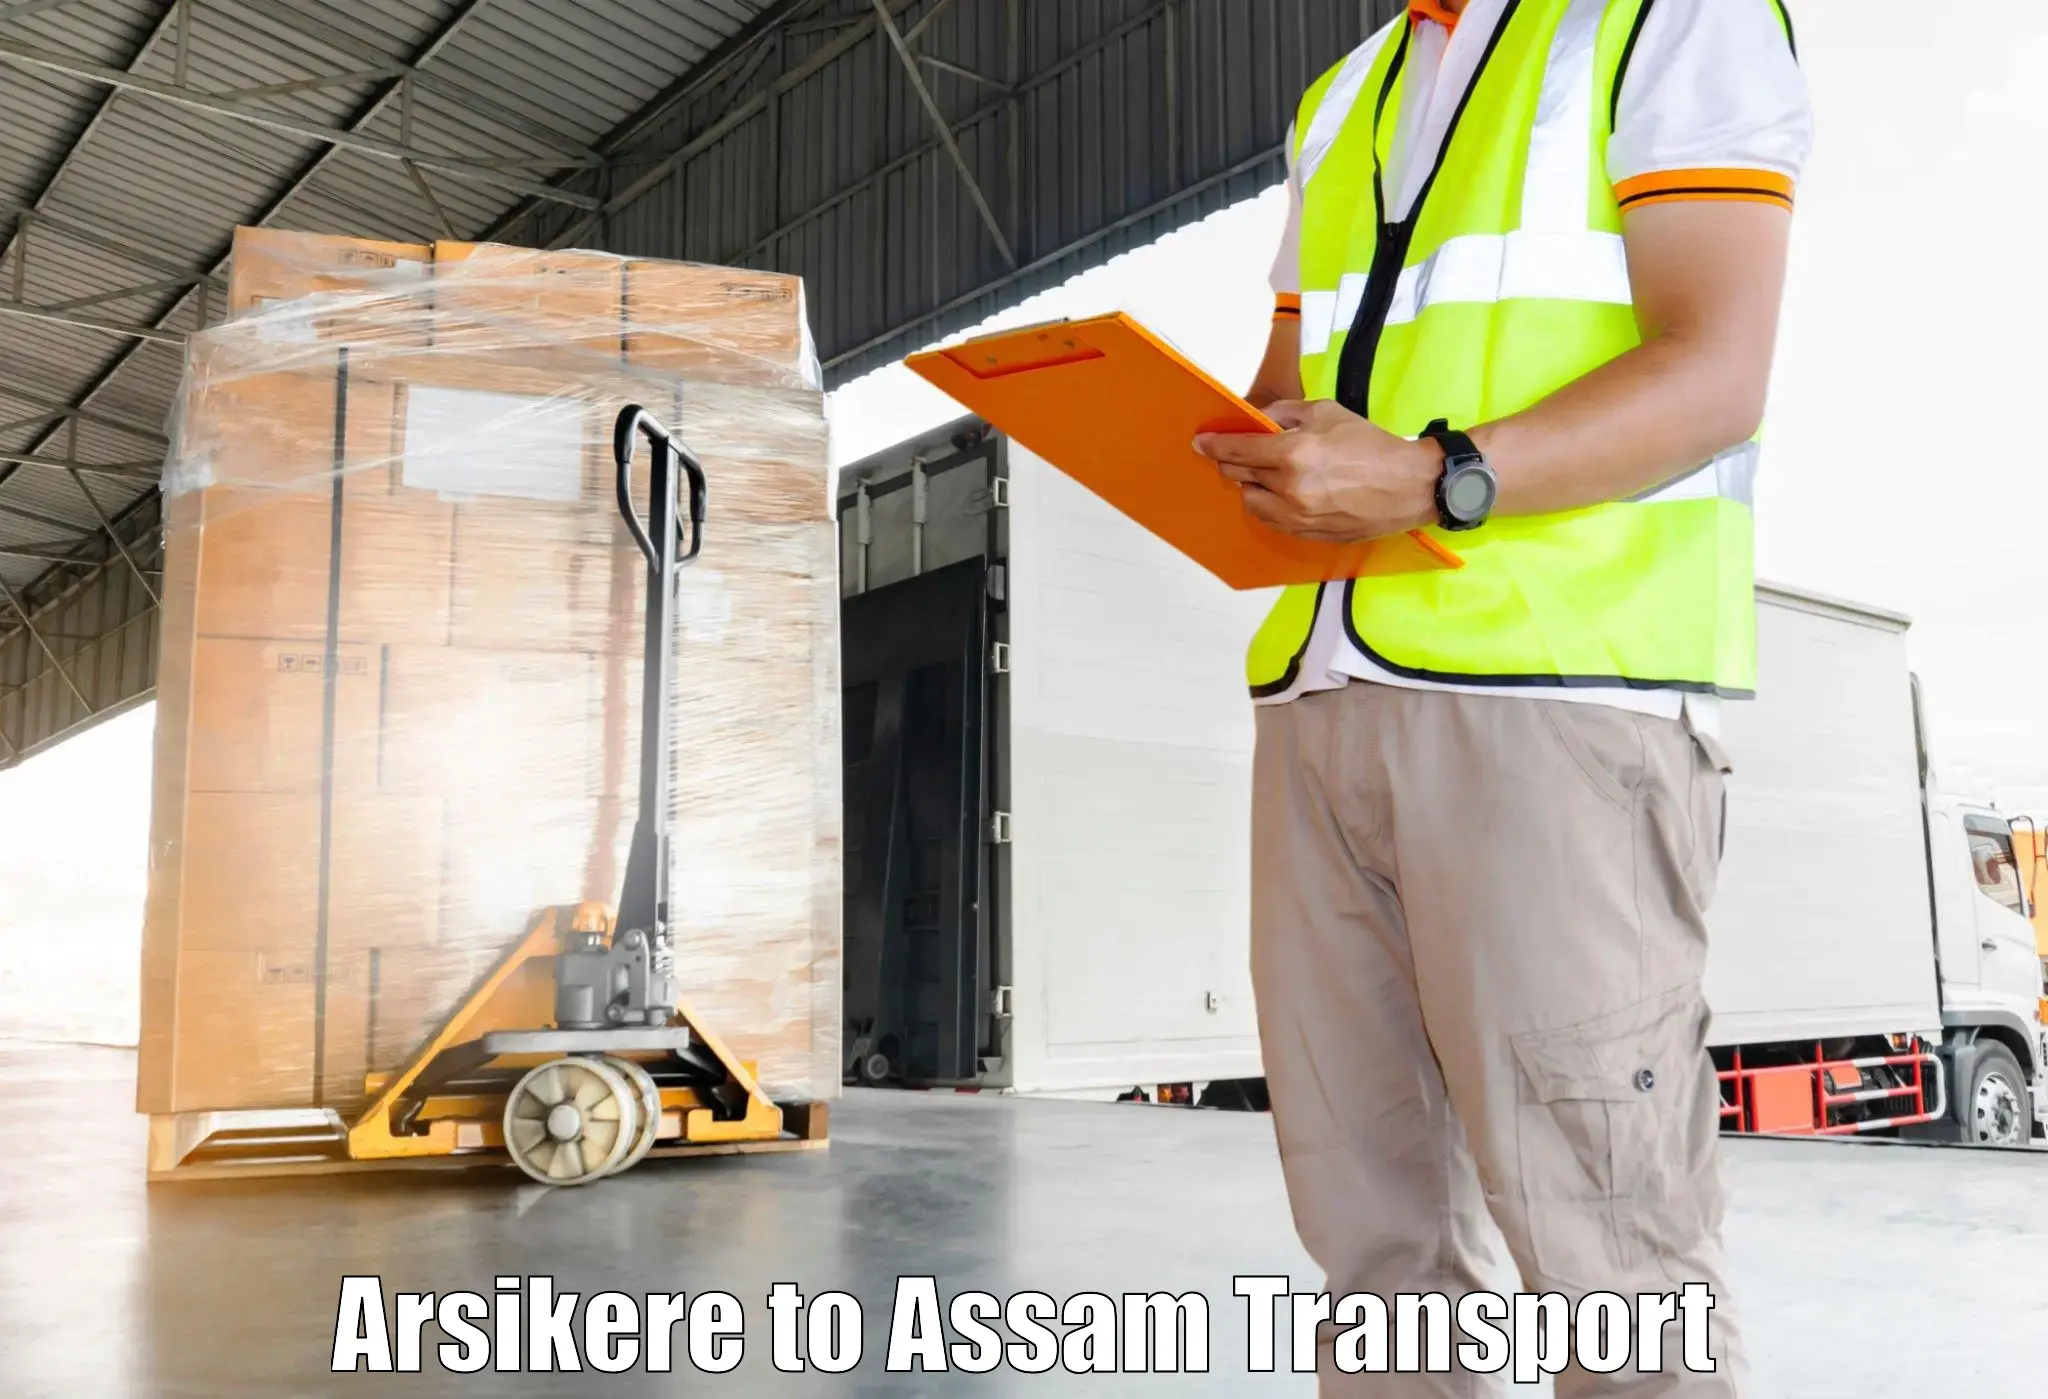 Cargo train transport services Arsikere to Margherita